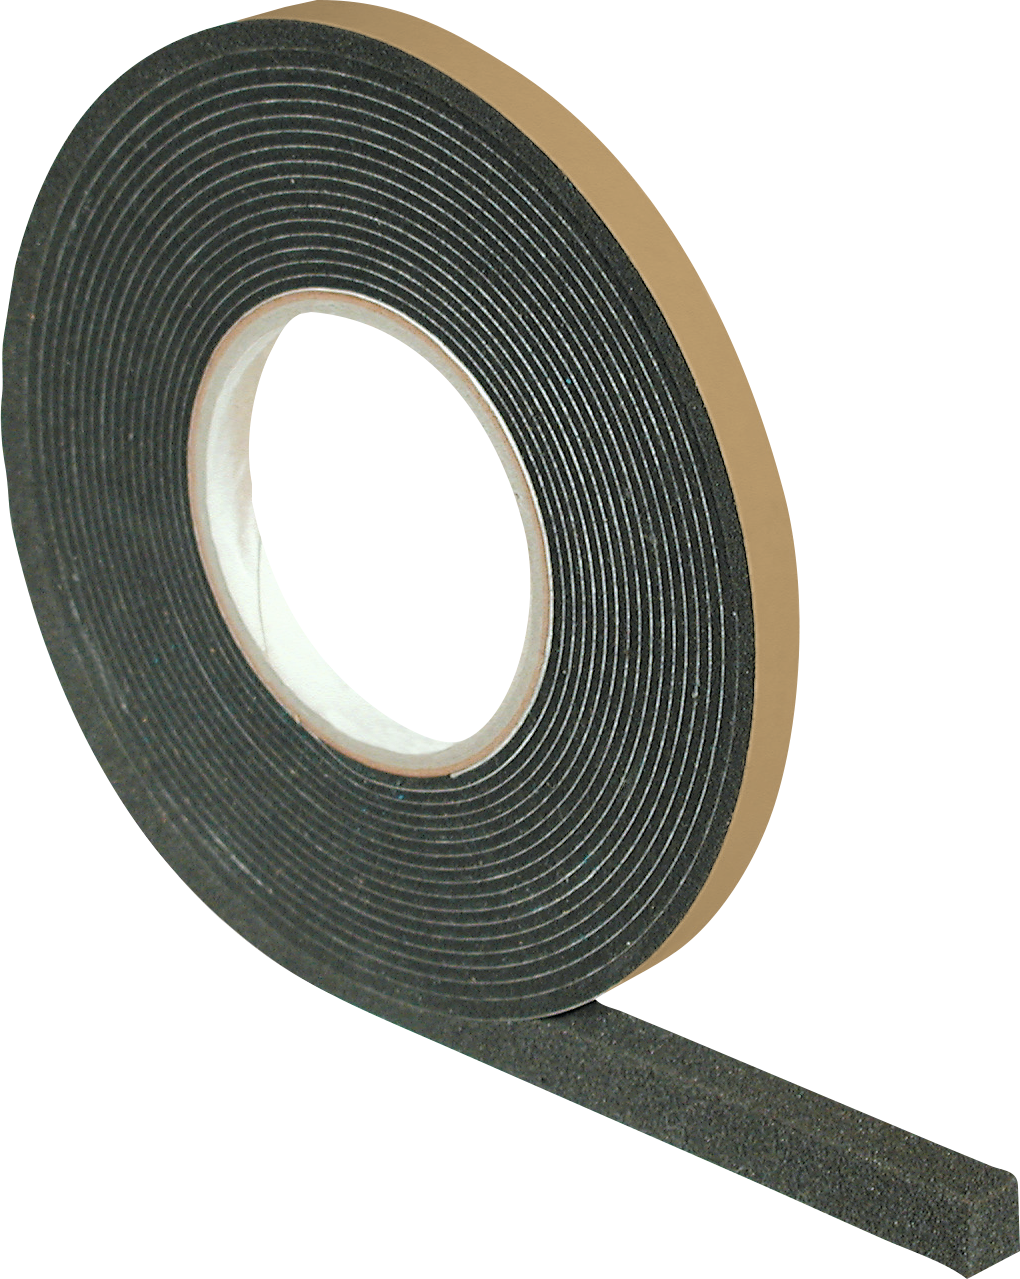 OTTO FUGENBAND BG1 15/2 A VE 87.5M 12.5M/ROLLE